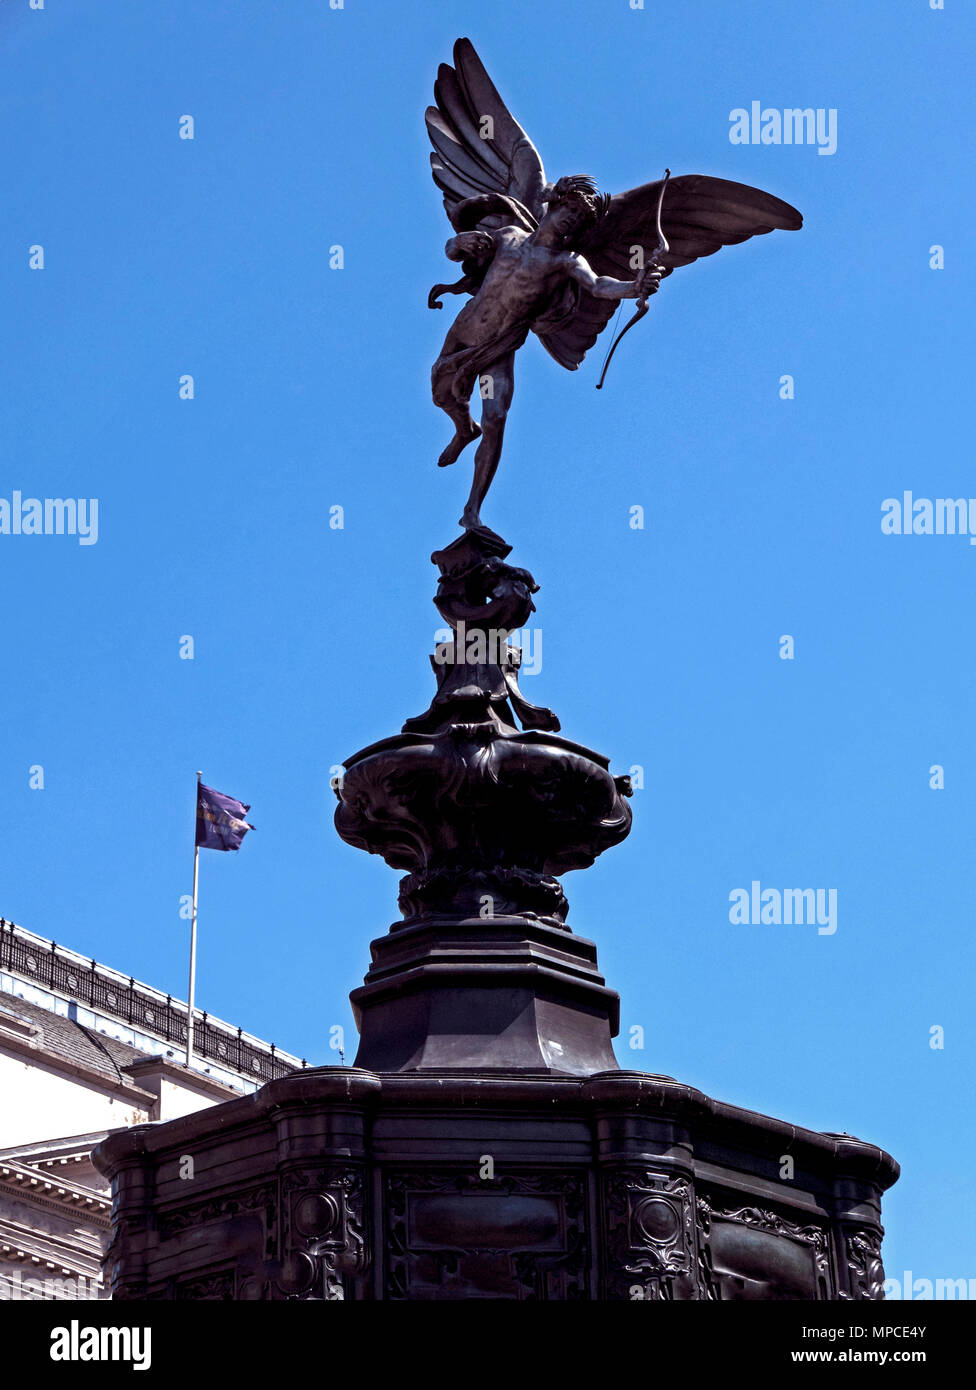 Eros Statue in Piccadilly Circus under clear blue sky Stock Photo